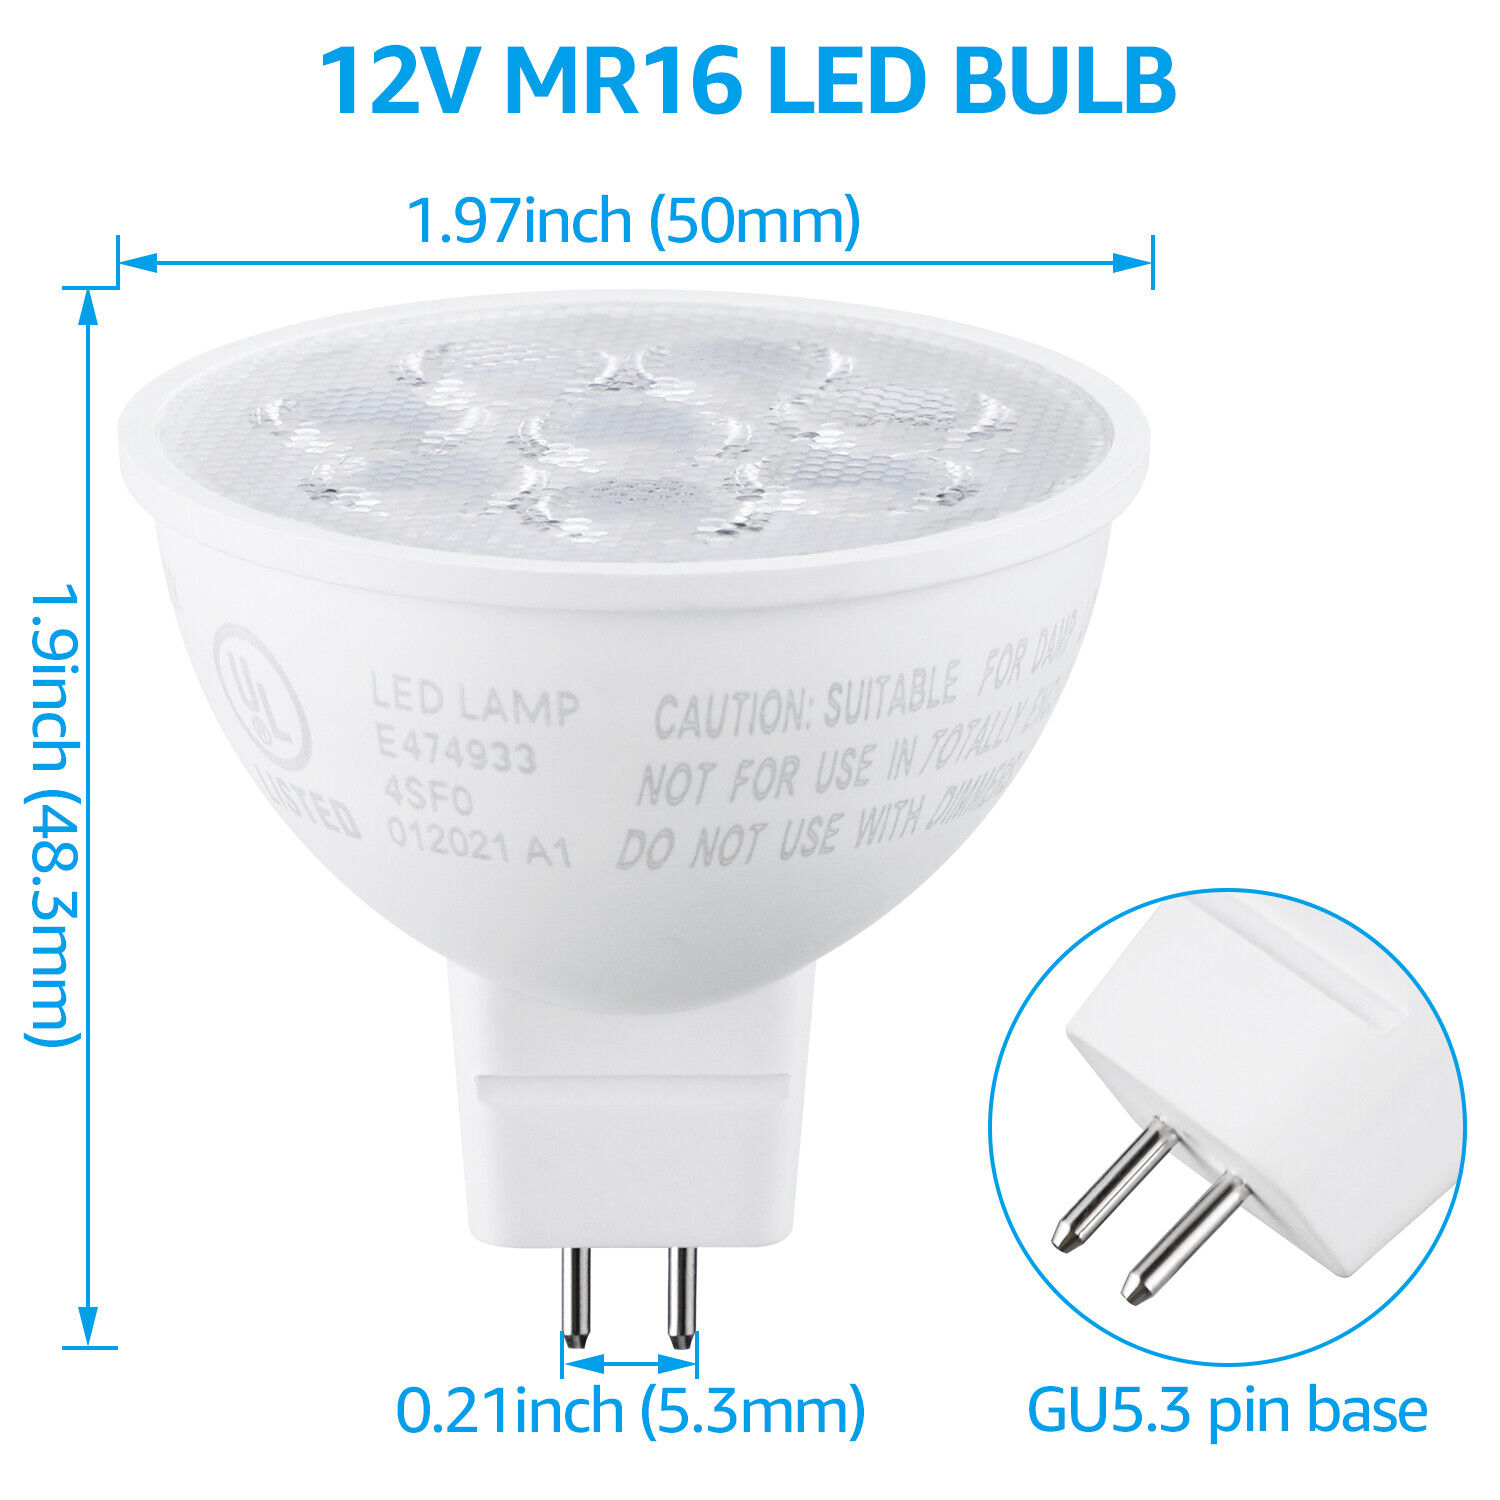 Need Brighter Illumination In Hard-To-Reach Places: 12 Volt GU10 LED Bulbs That Shine